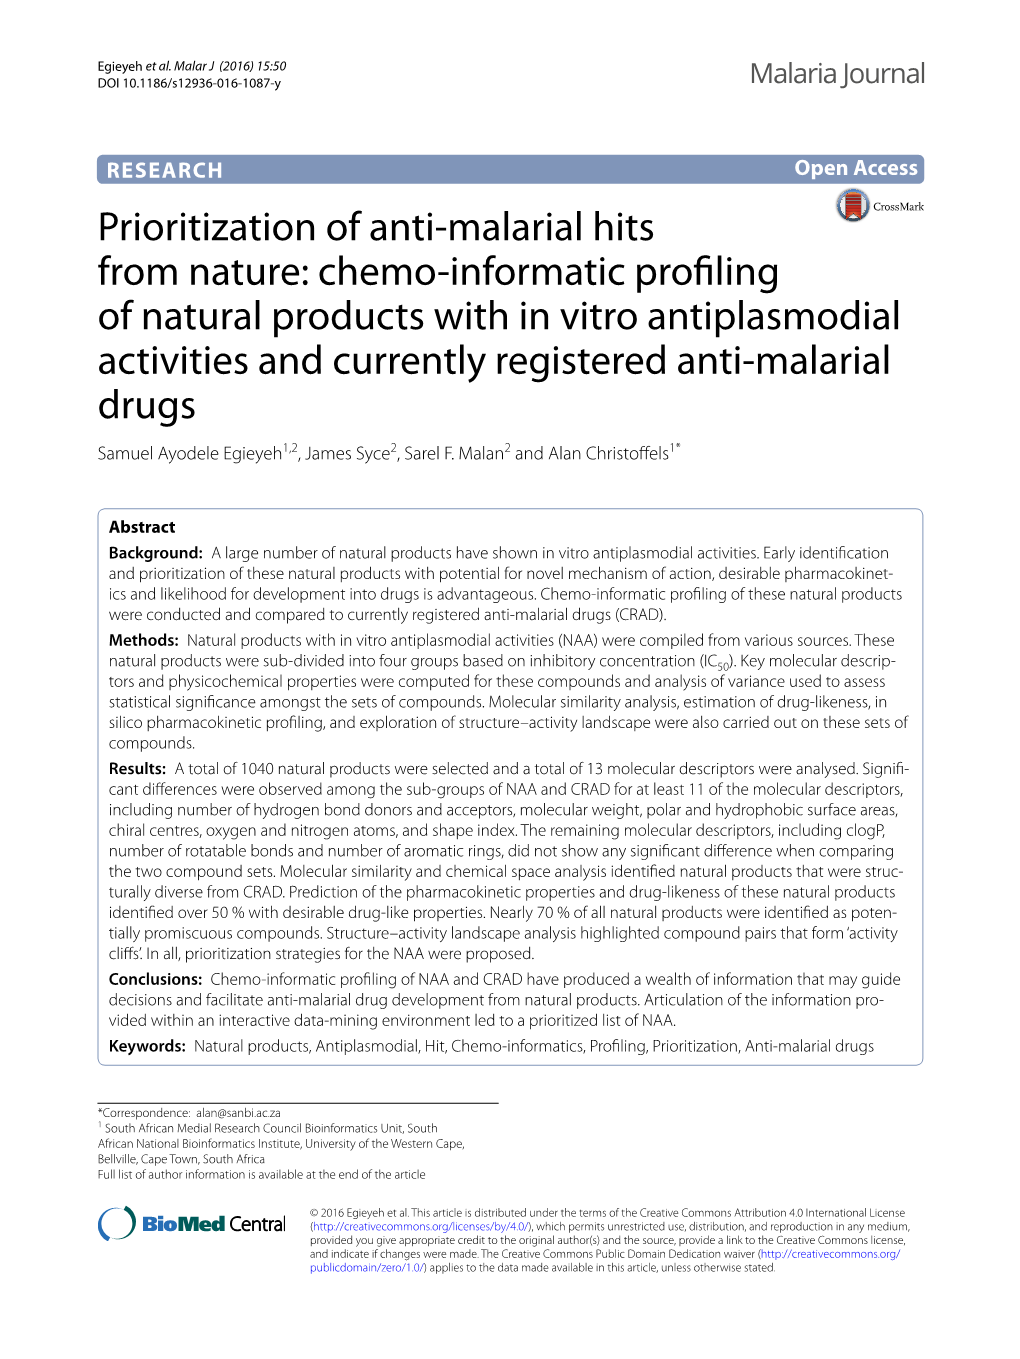 Prioritization of Anti-Malarial Hits from Nature: Chemo-Informatic Profiling Of